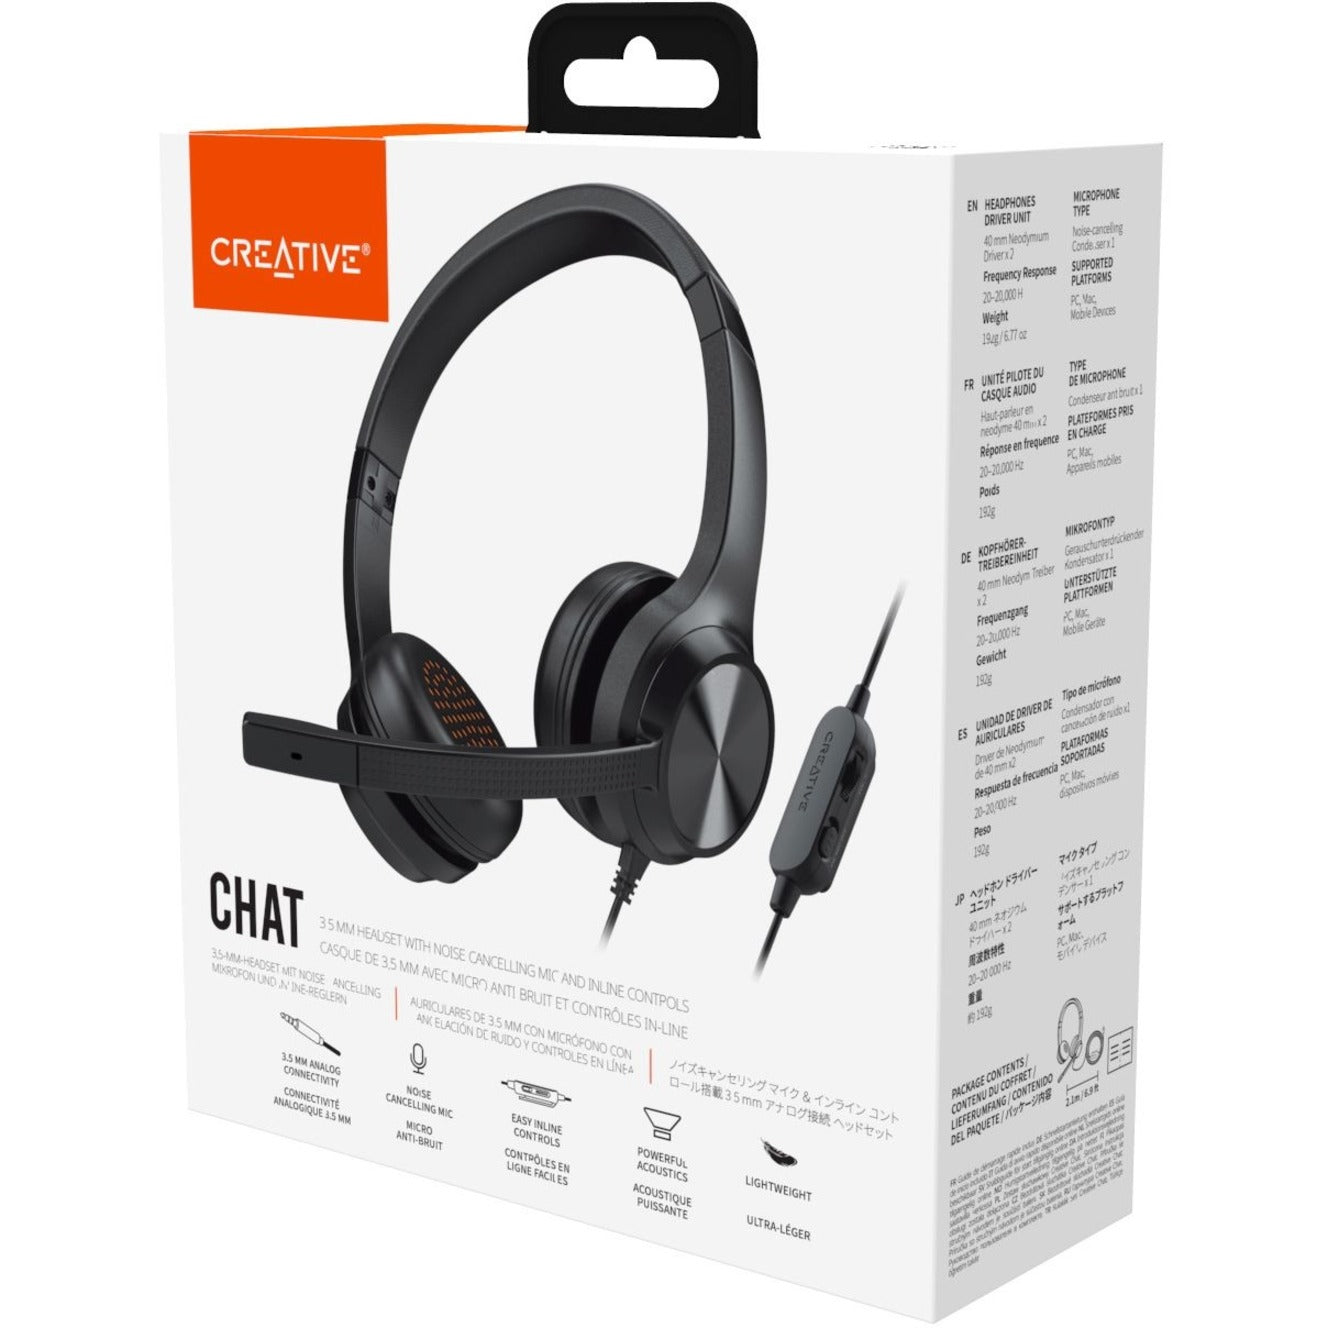 Creative 51EF0970AA000 CHAT USB Headset, Stereo On-ear Headphones with Noise Cancelling Microphone